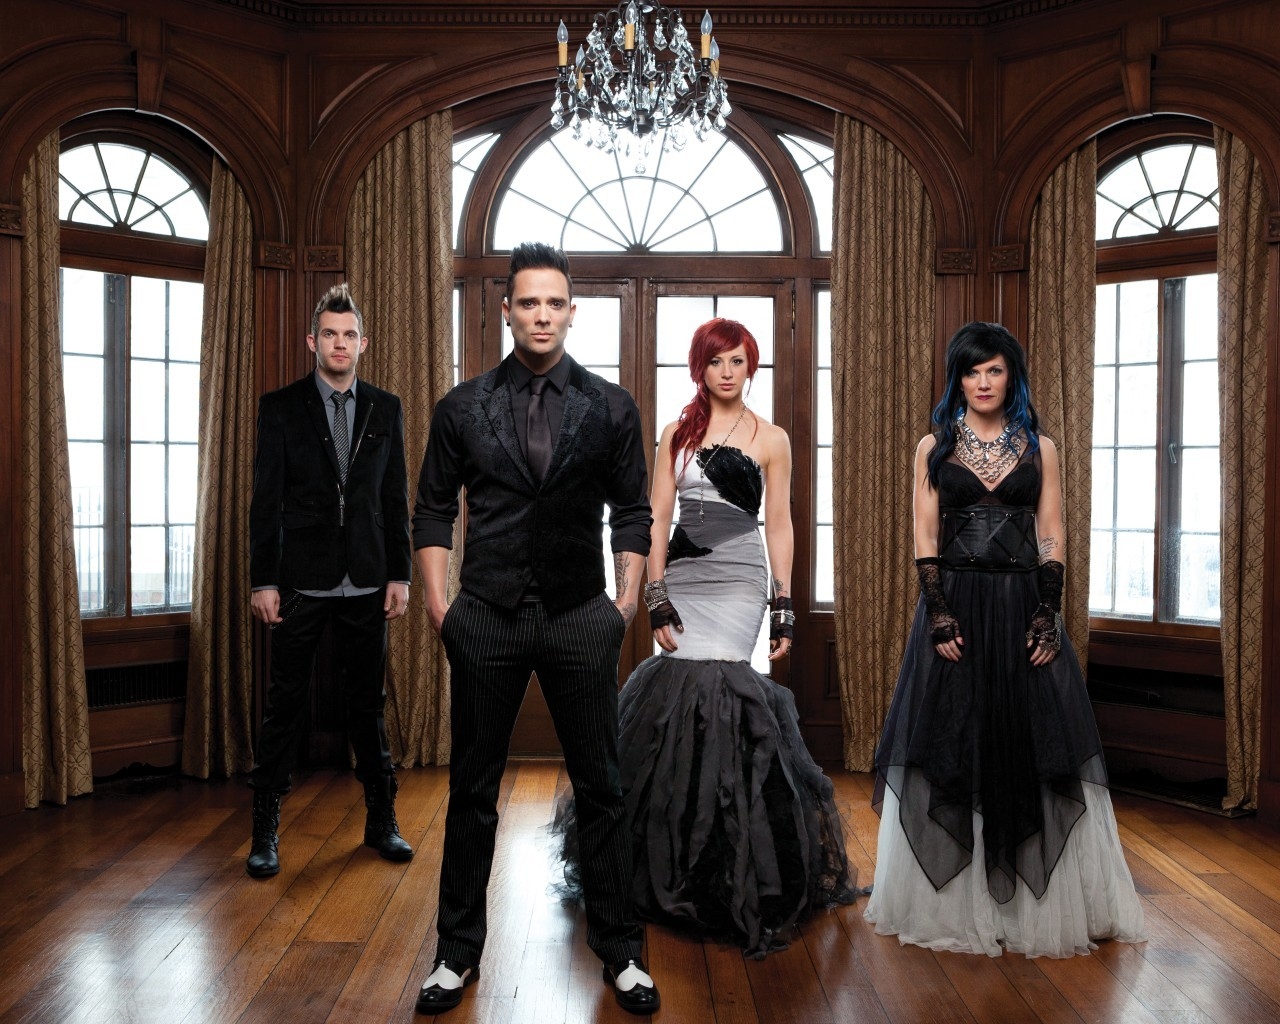 Skillet Rock Band for 1280 x 1024 resolution